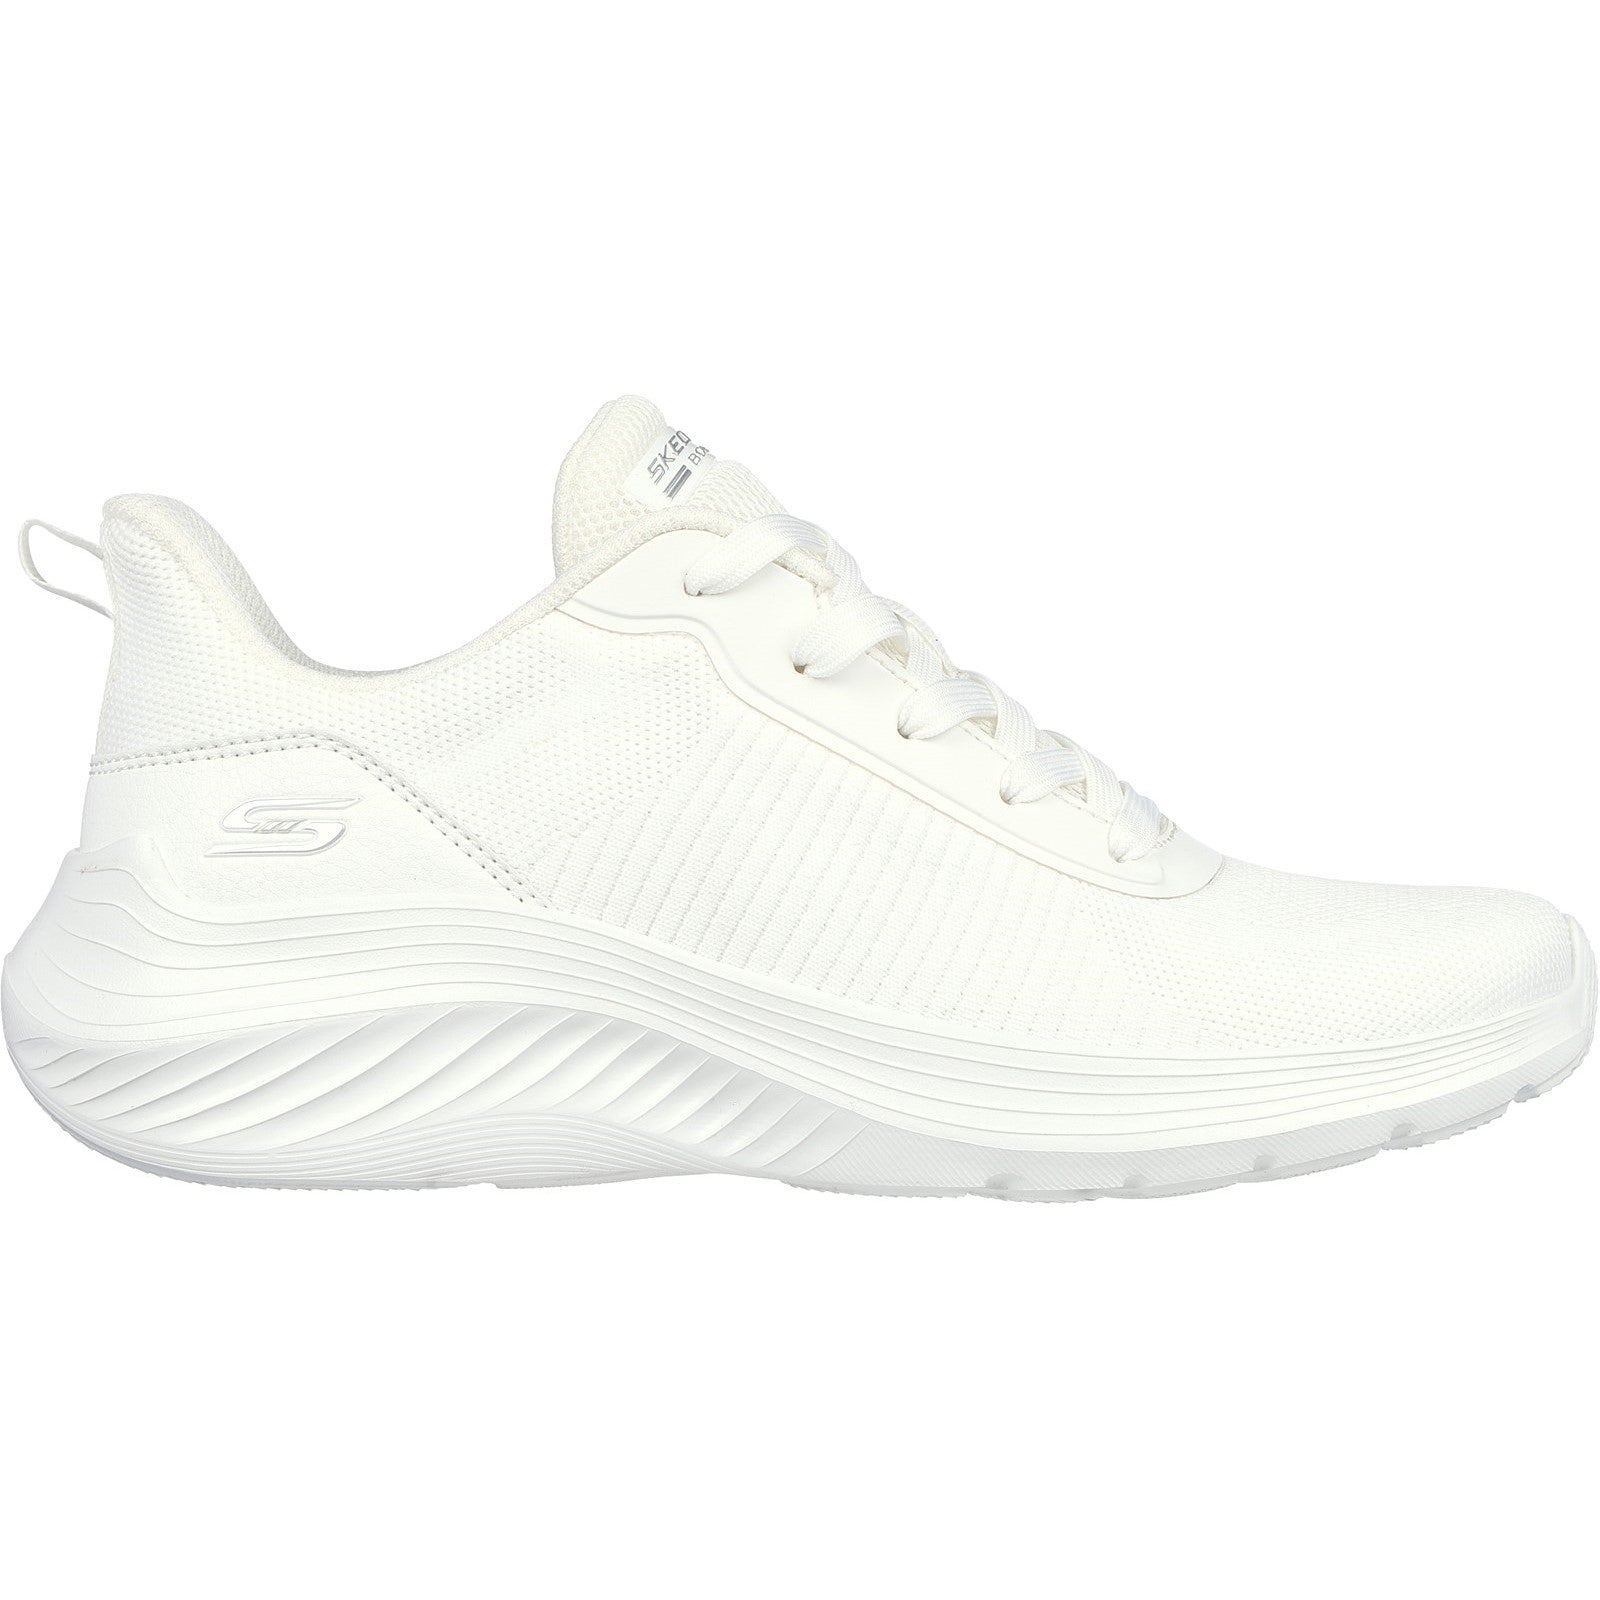 Skechers Womens Bobs Squad Waves Trainers - Off White